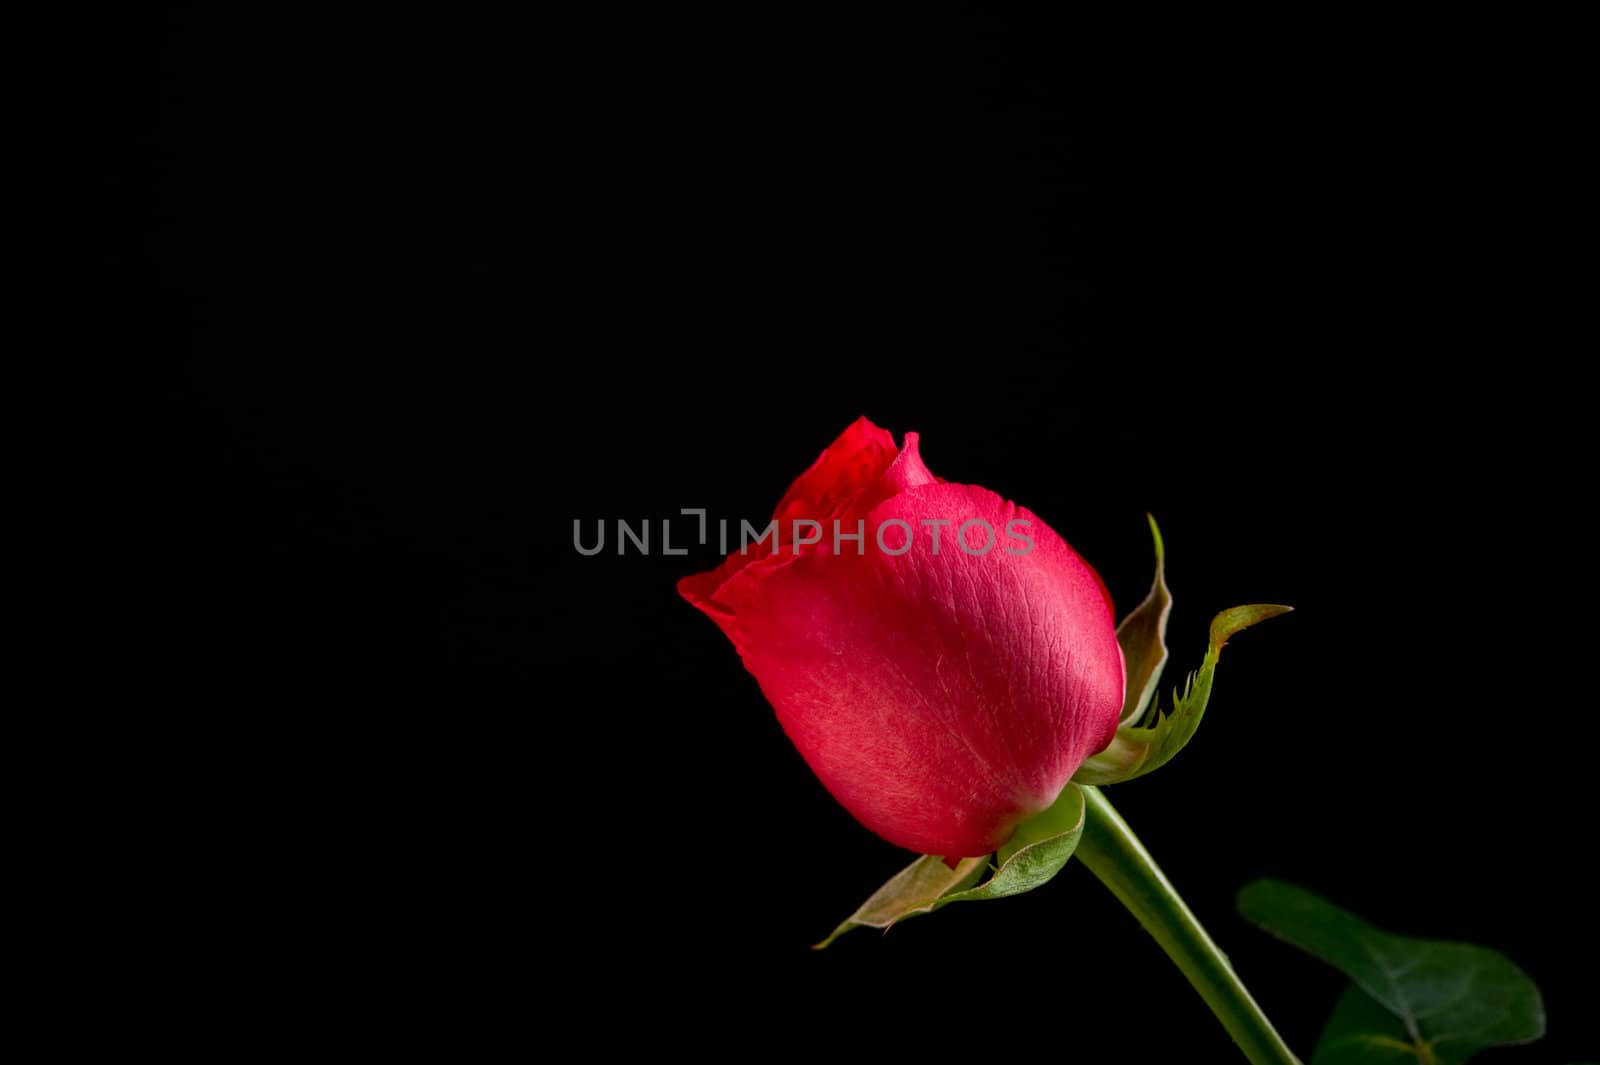 Image of a single red rose on black background